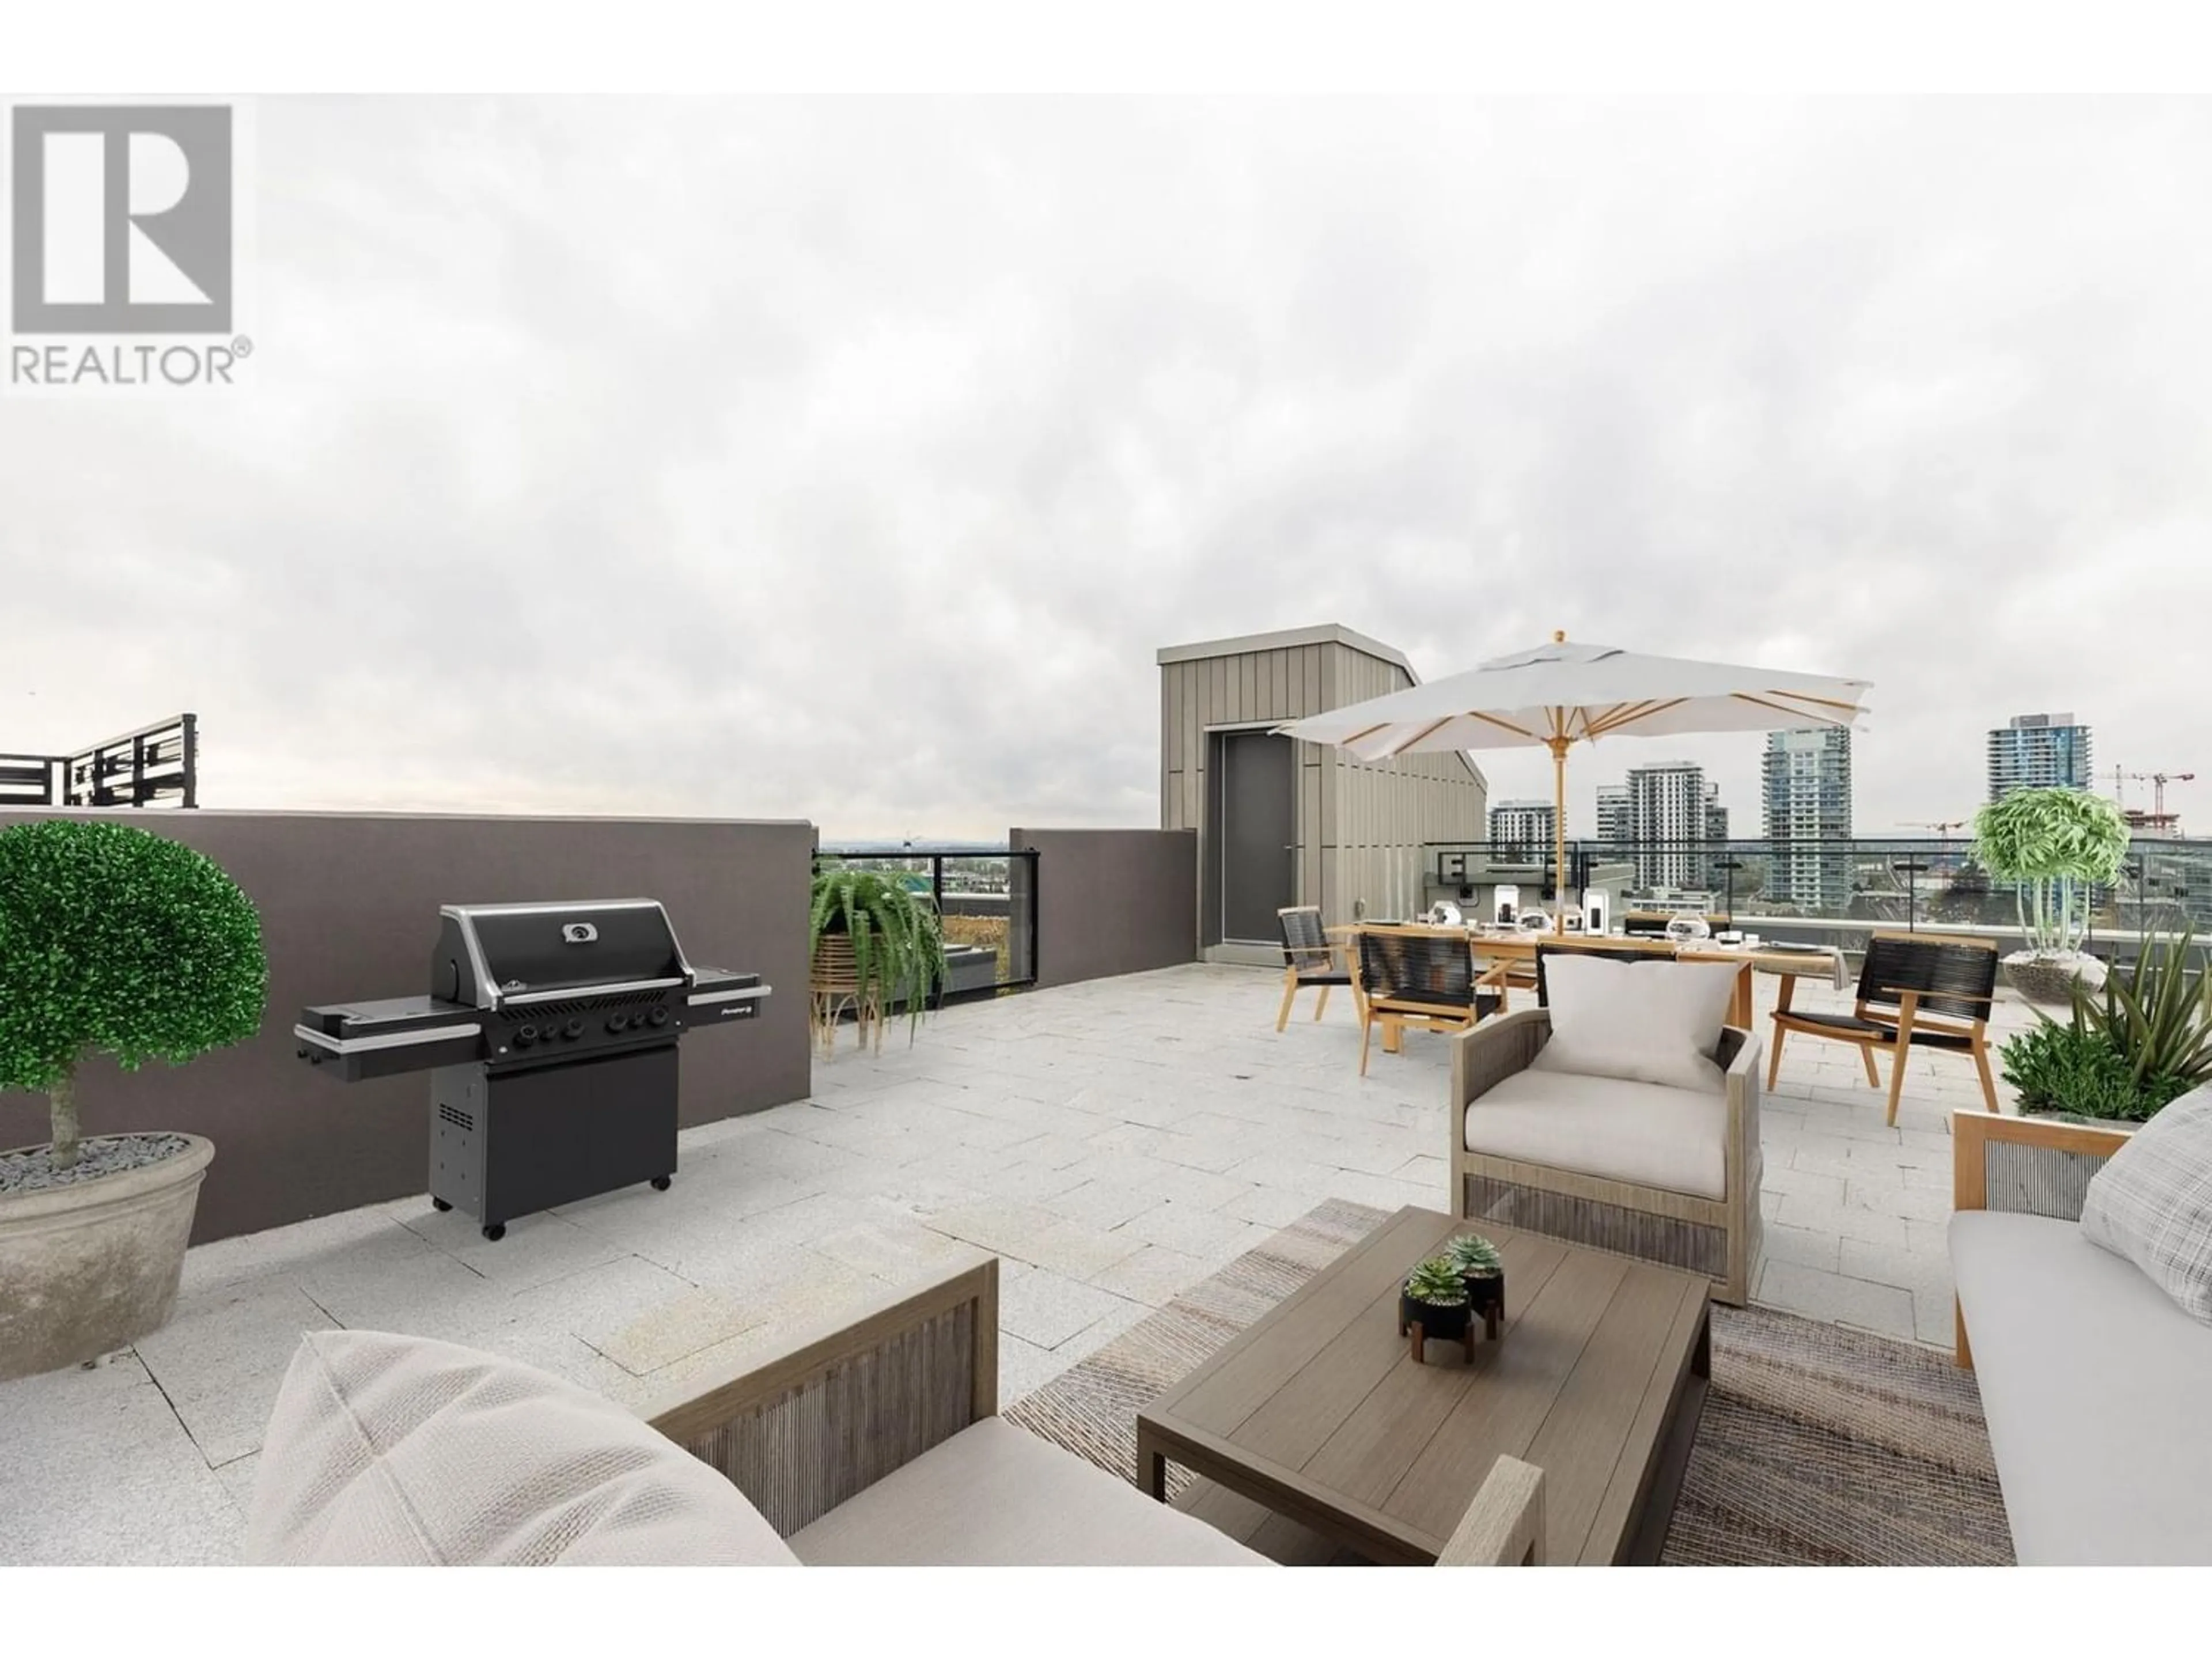 Patio for PH601 7638 CAMBIE STREET, Vancouver British Columbia V6P3H7